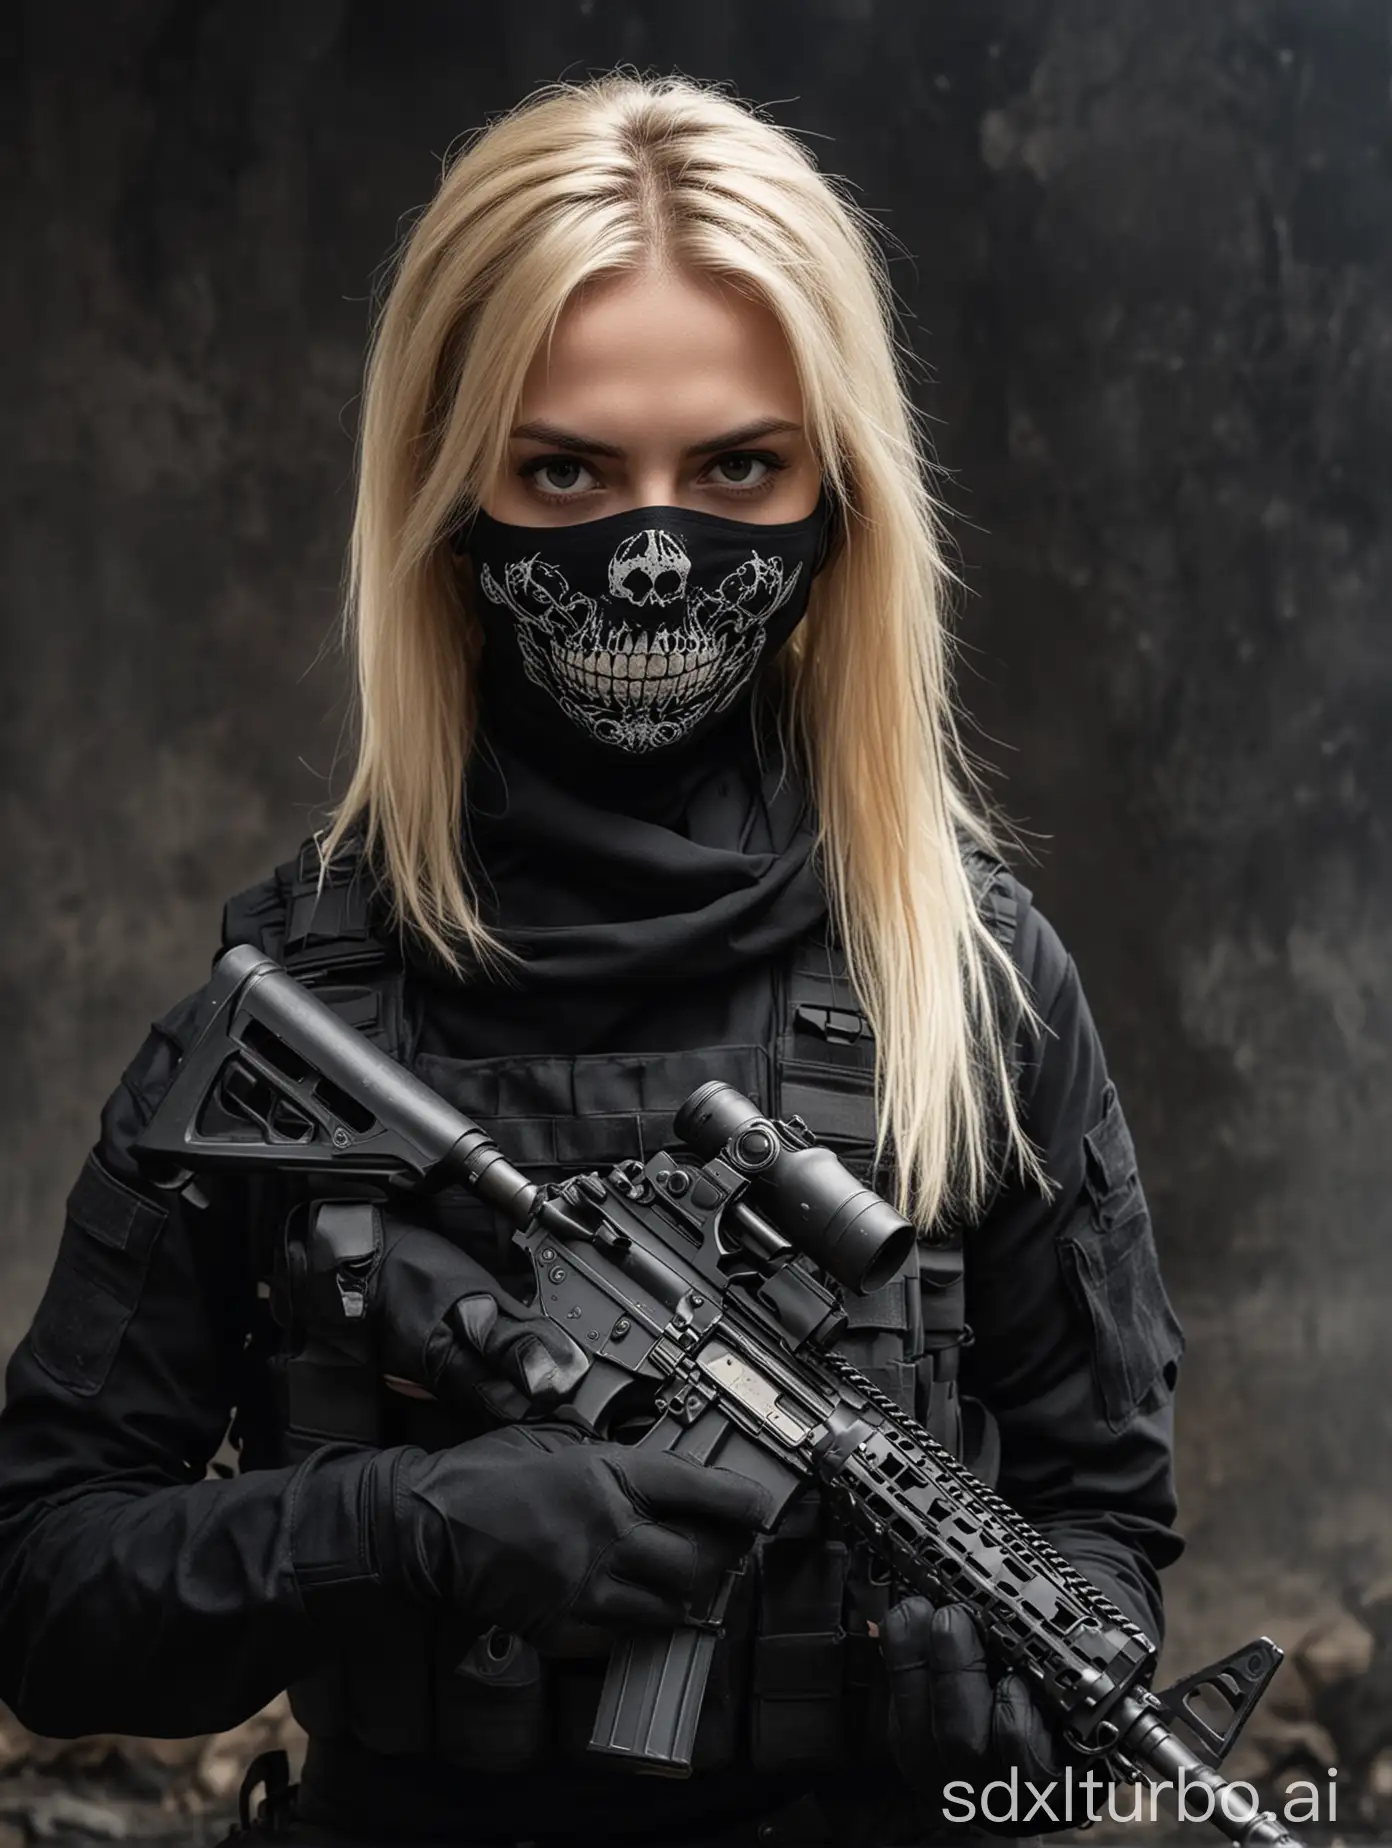 Beautiful blonde girl with very fair skin in black black tactical military uniform using a black balaclava with skull pattern, tactical black gloves, carrying an assault rifle, night and background explosions